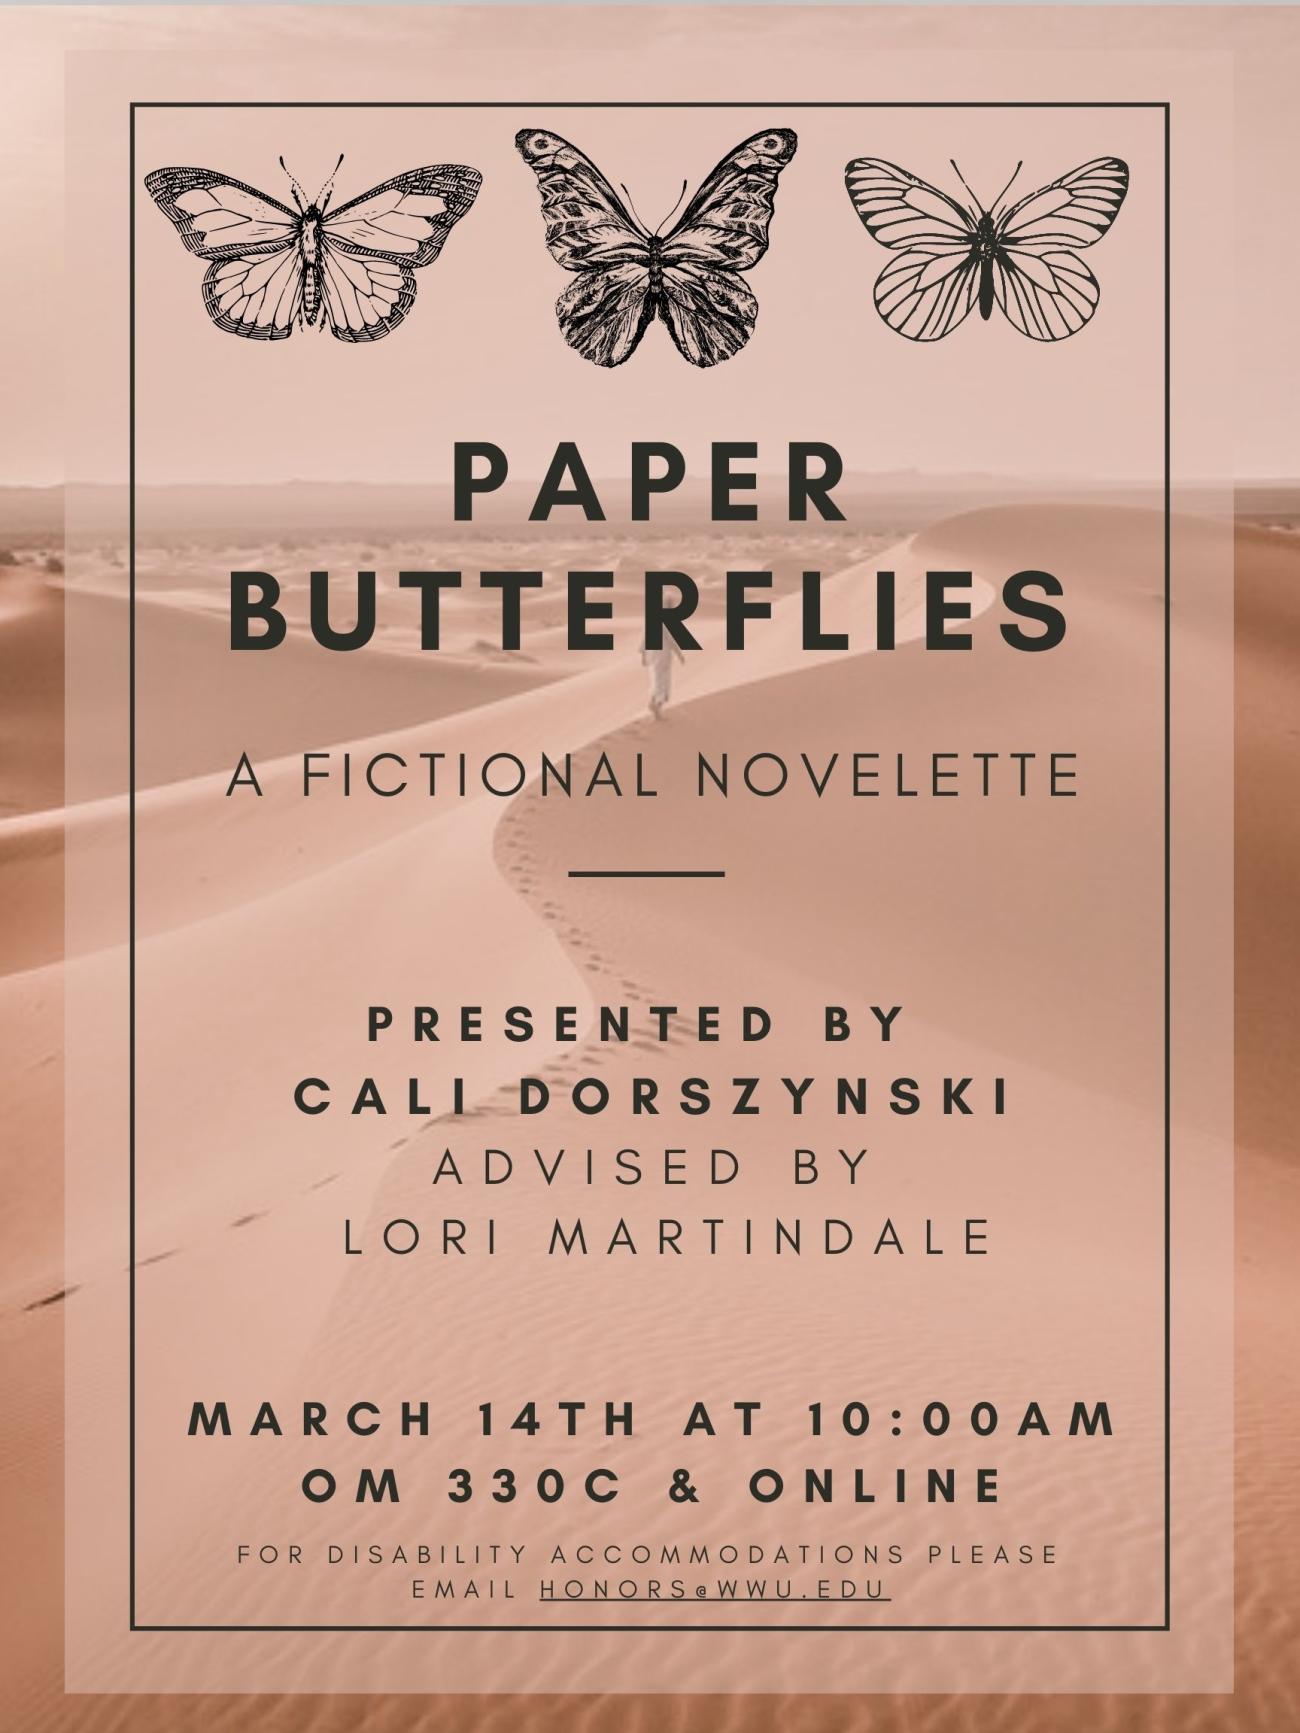 A poster that has a desert filled with sand dunes and three black and white butterflies stenciled at the top of the page. The text reads: "Paper Butterflies, a fictional novelette, presented by Cali Dorszynski, advised by Lori Martindale, march 14th at 10:00 am OM 330C and online, for disability accommodations please email honors@wwu.edu."